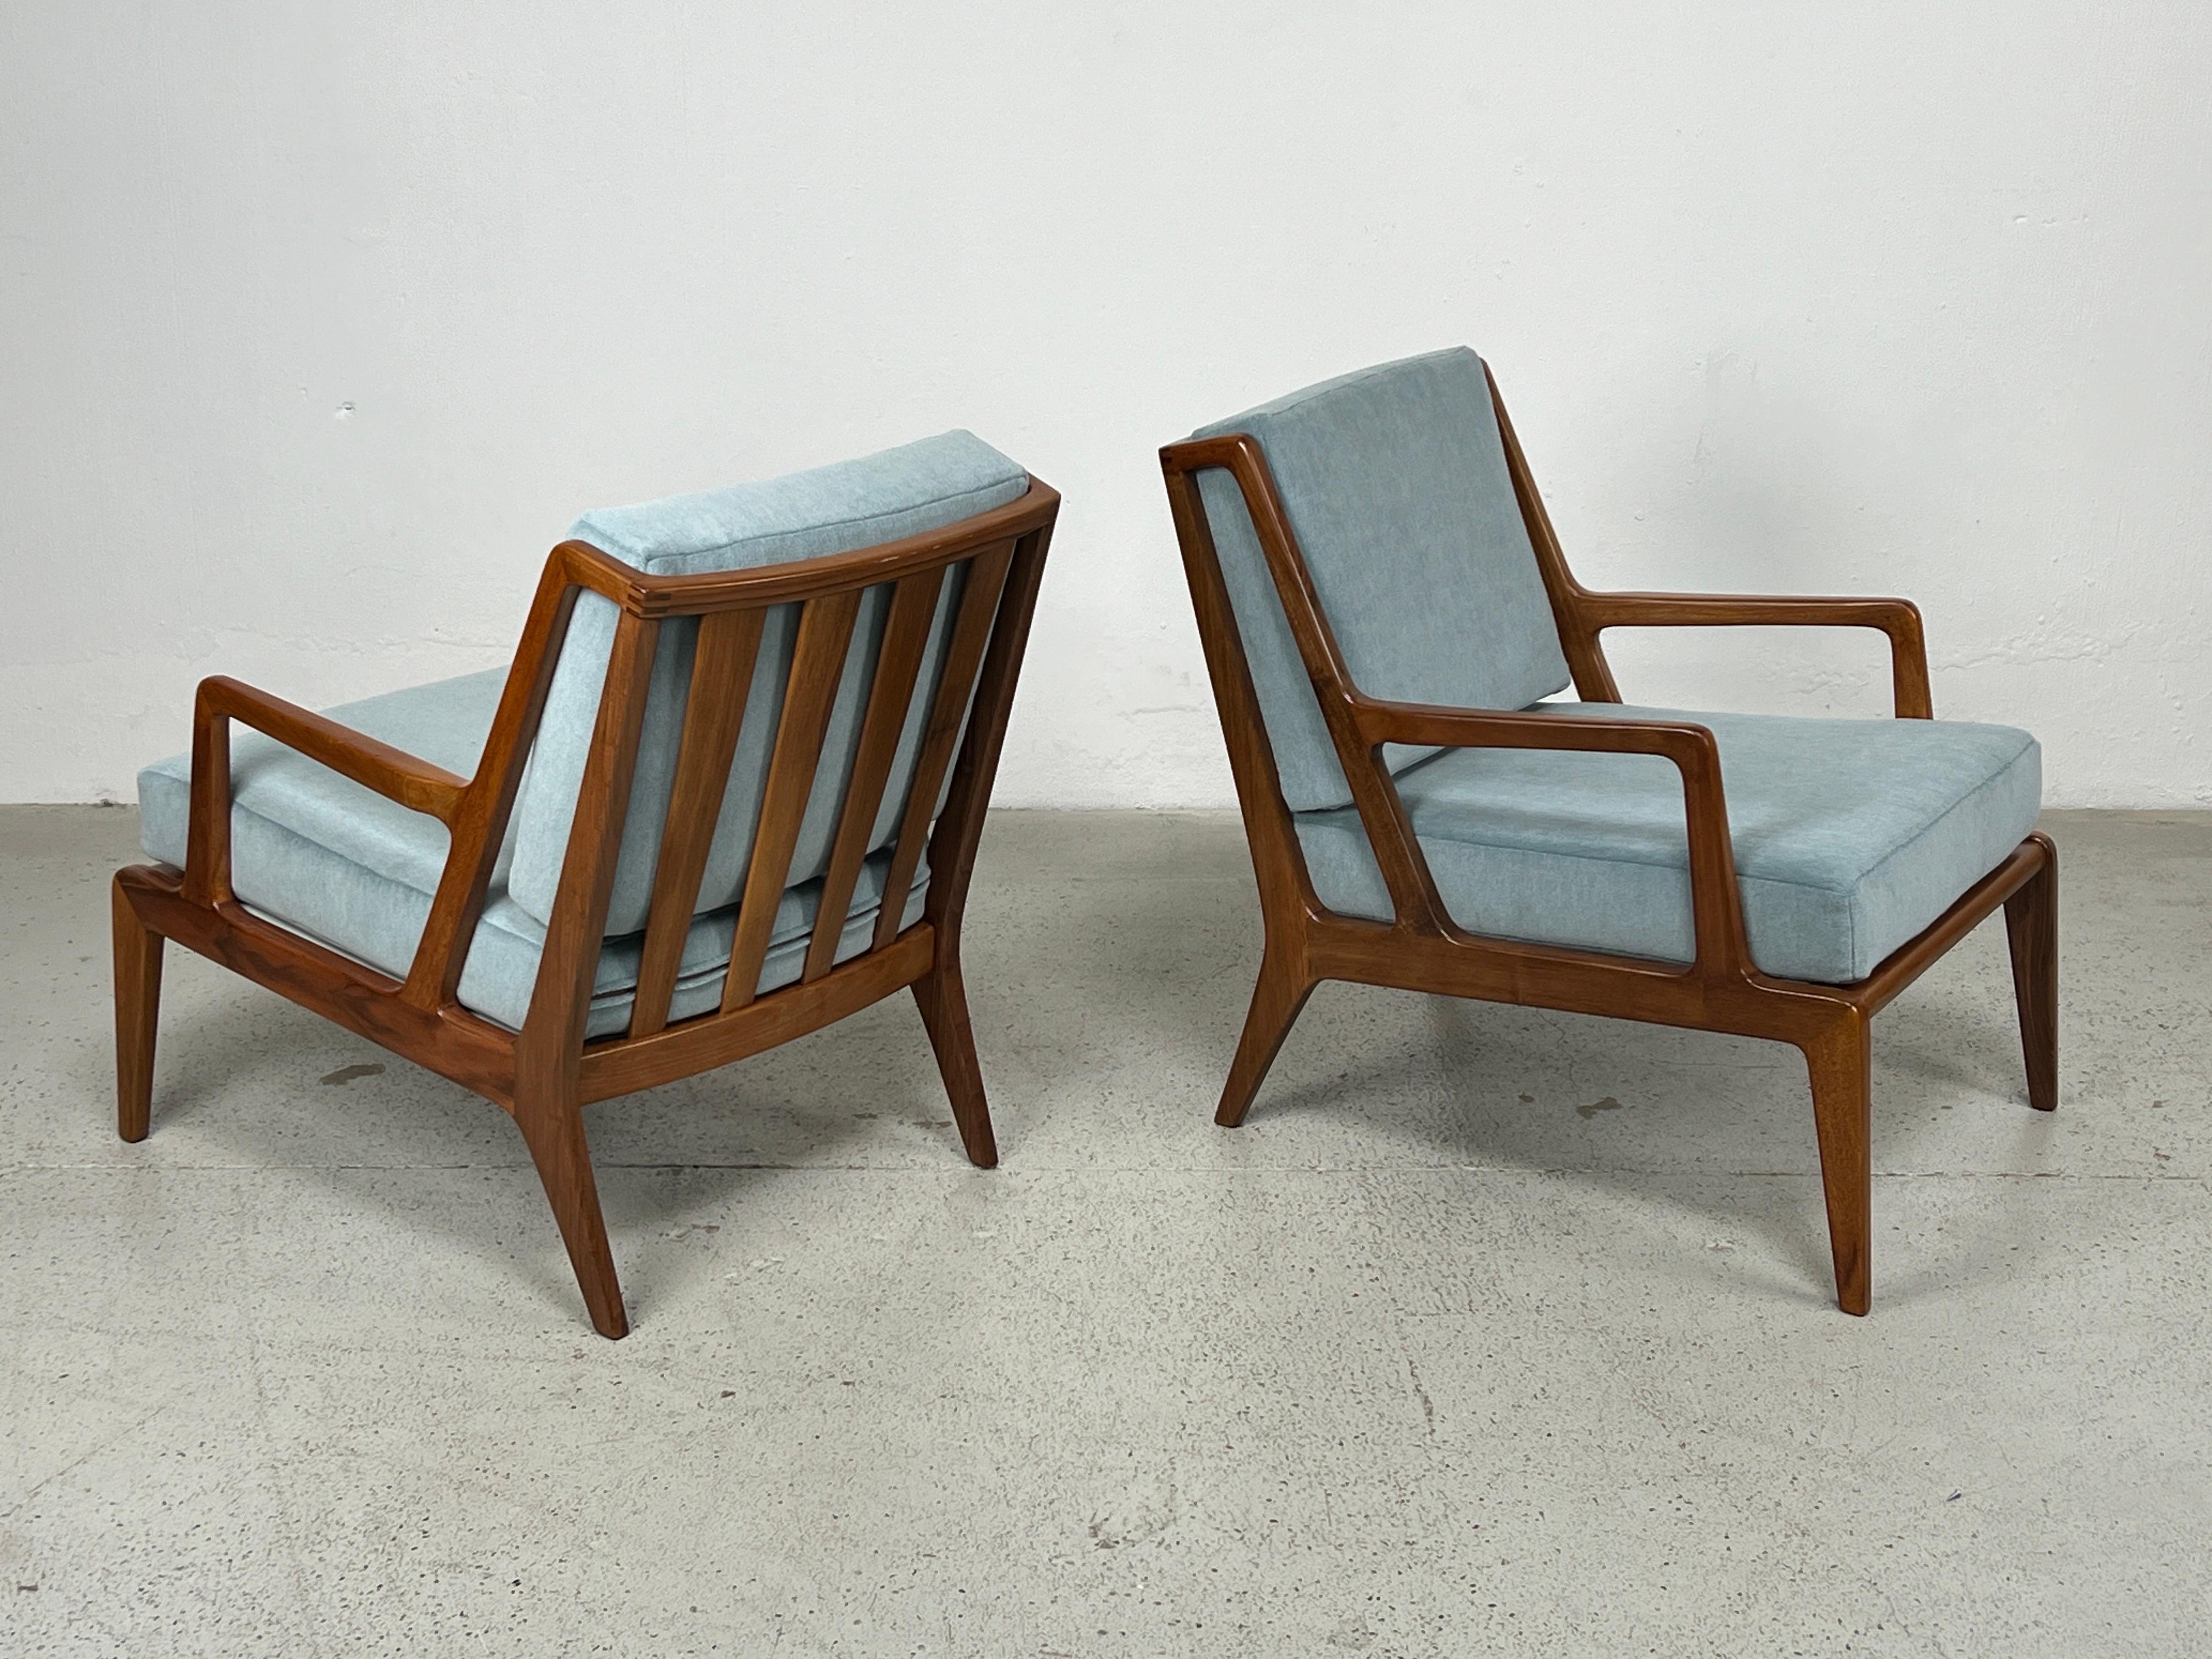 A rare pair of walnut lounge chairs model #255 for Singer and Sons. These were designed by either Carlo Mollino, Gio Ponti, Carlo de Carli or Bertha Schaefer. 